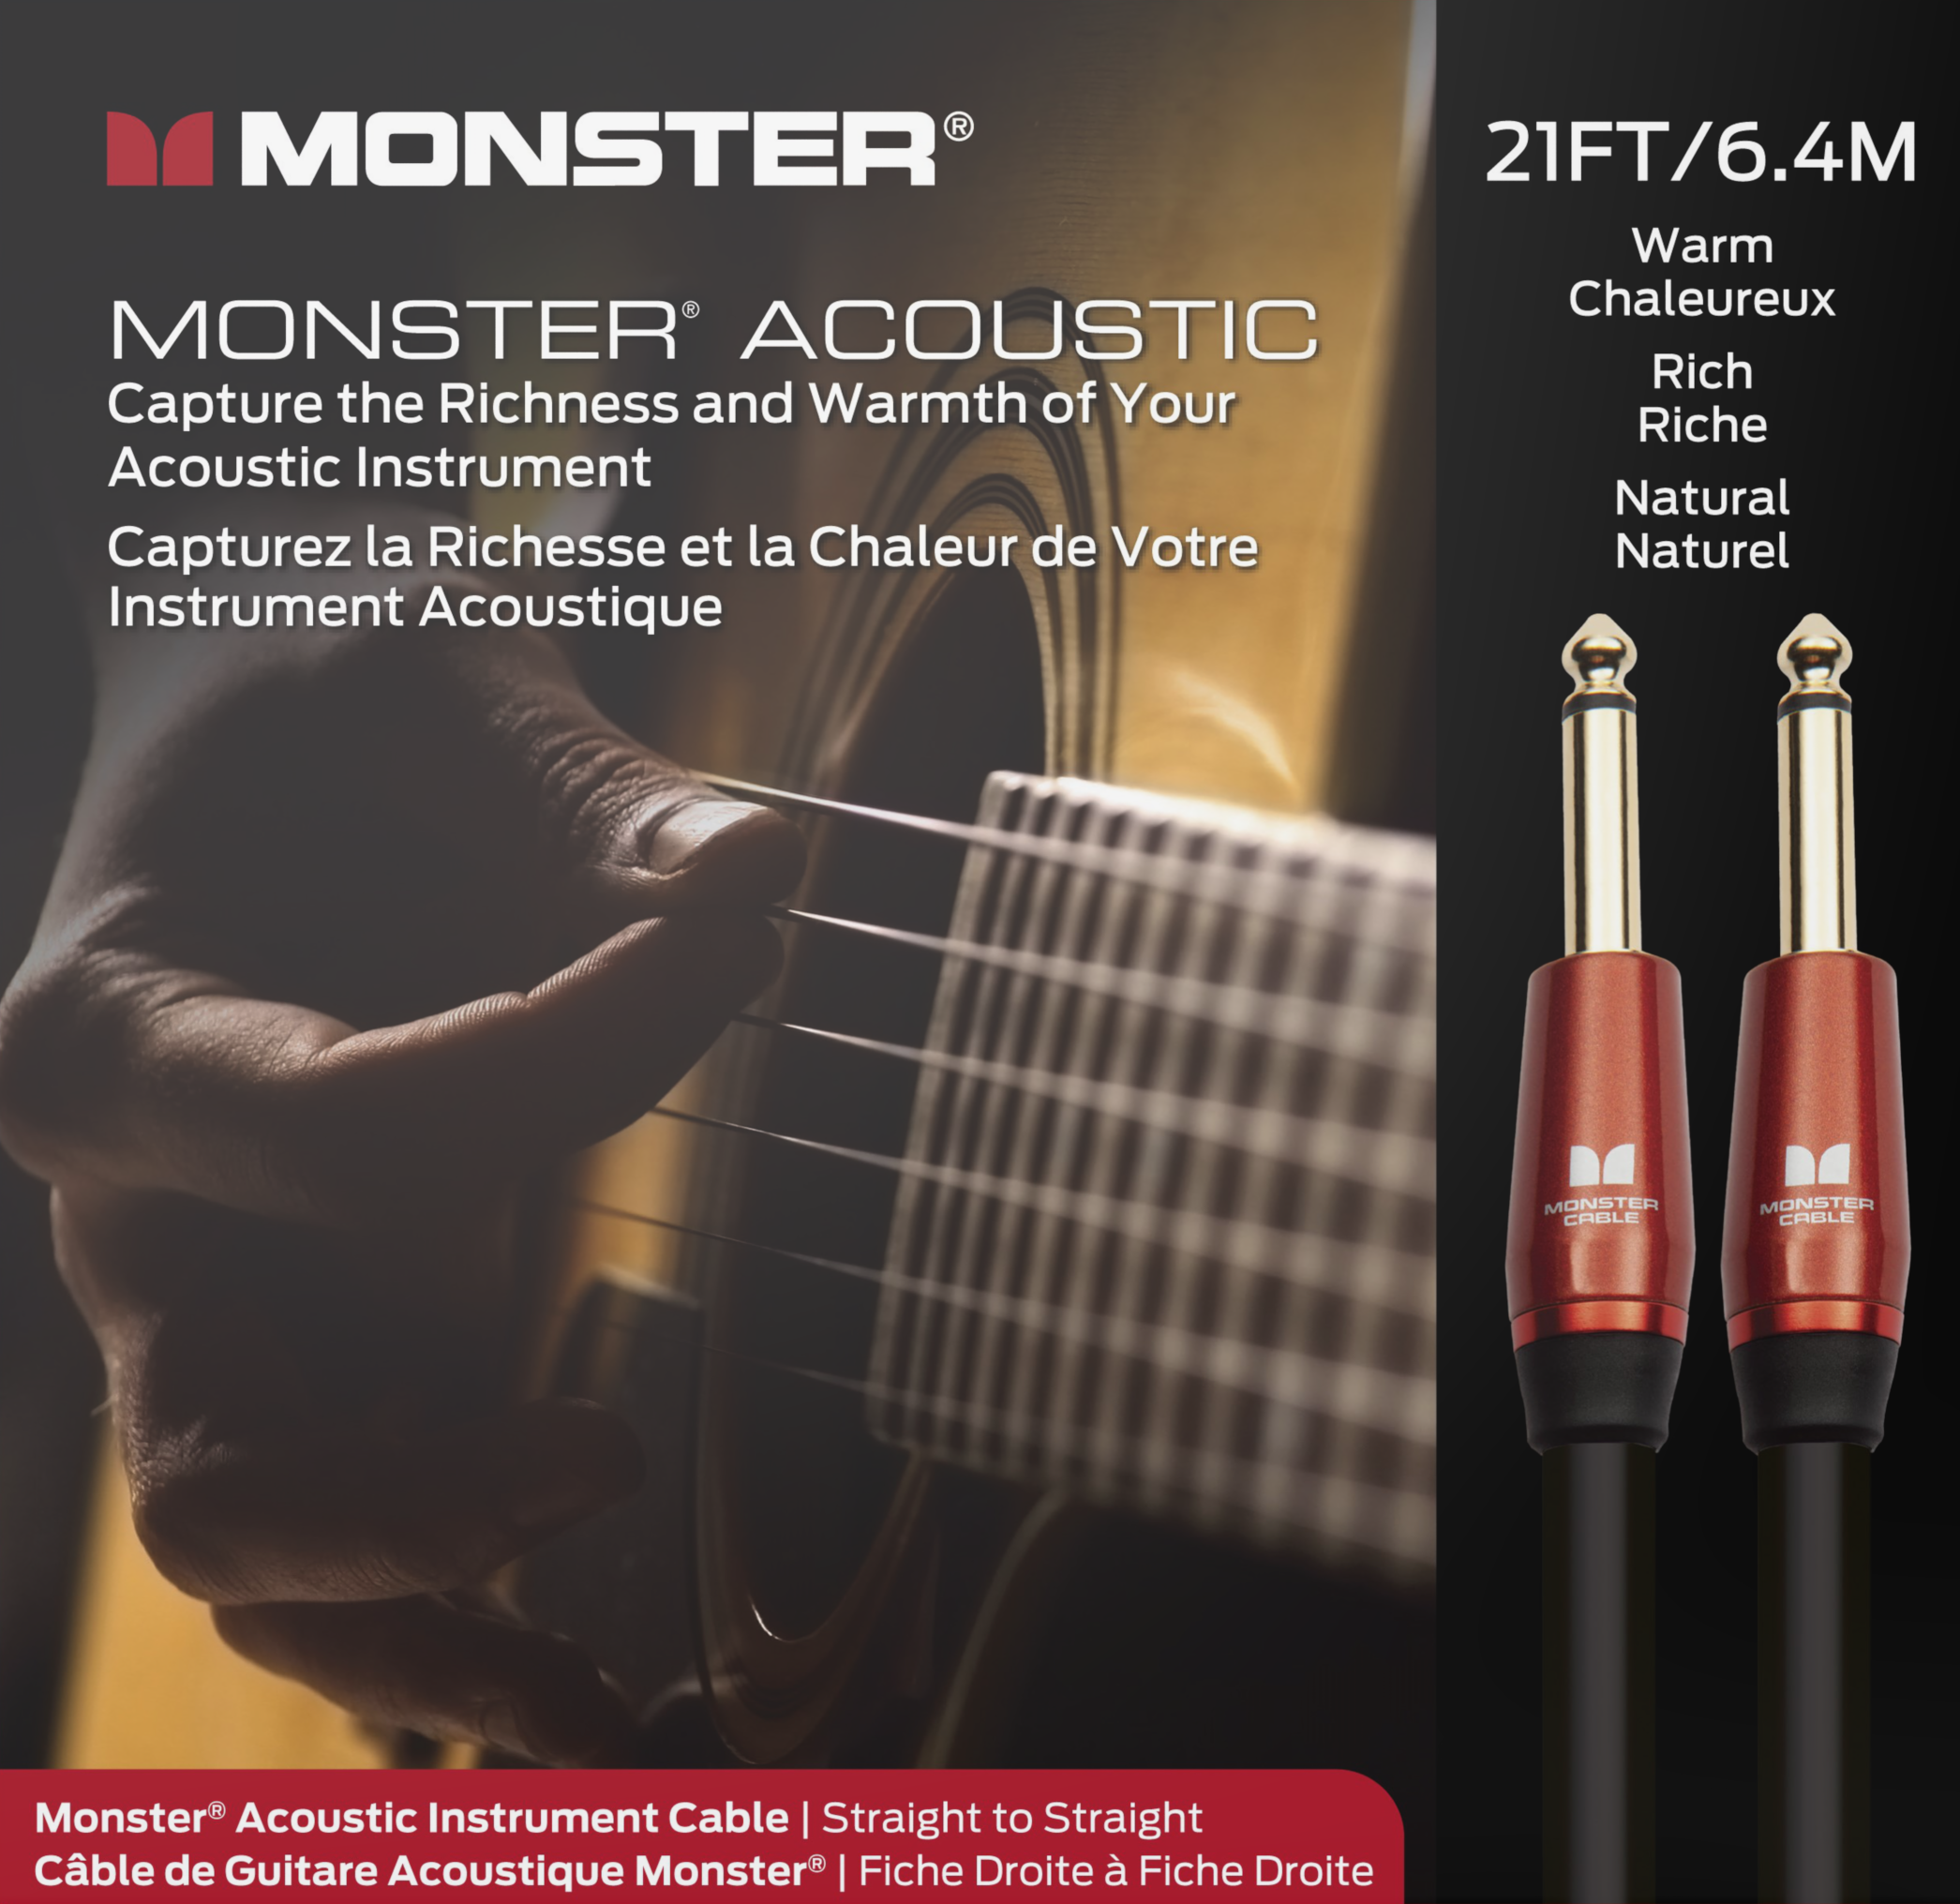 Monster® Prolink Acoustic Instrument Cable - HIENDGUITAR 21ft(6.4m) / Straight-straight 21ft(6.4m) Monstercable Cable